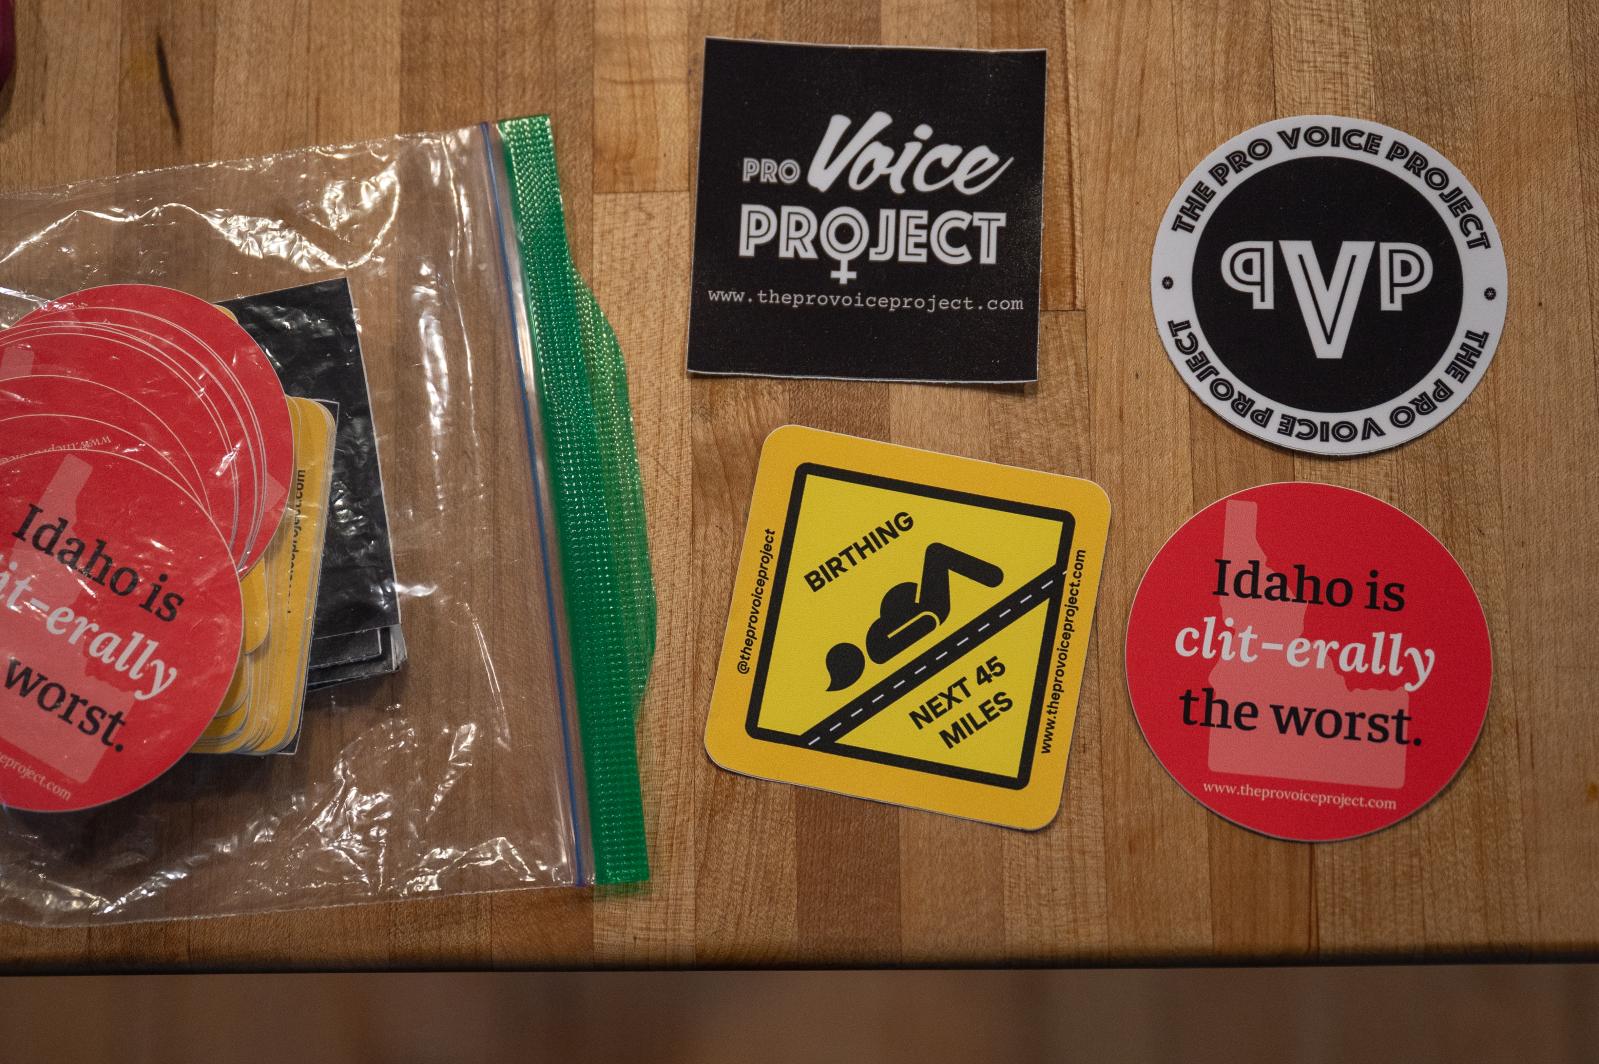 Pro Voice Project stickers are seen at Jen Jackson Quintano